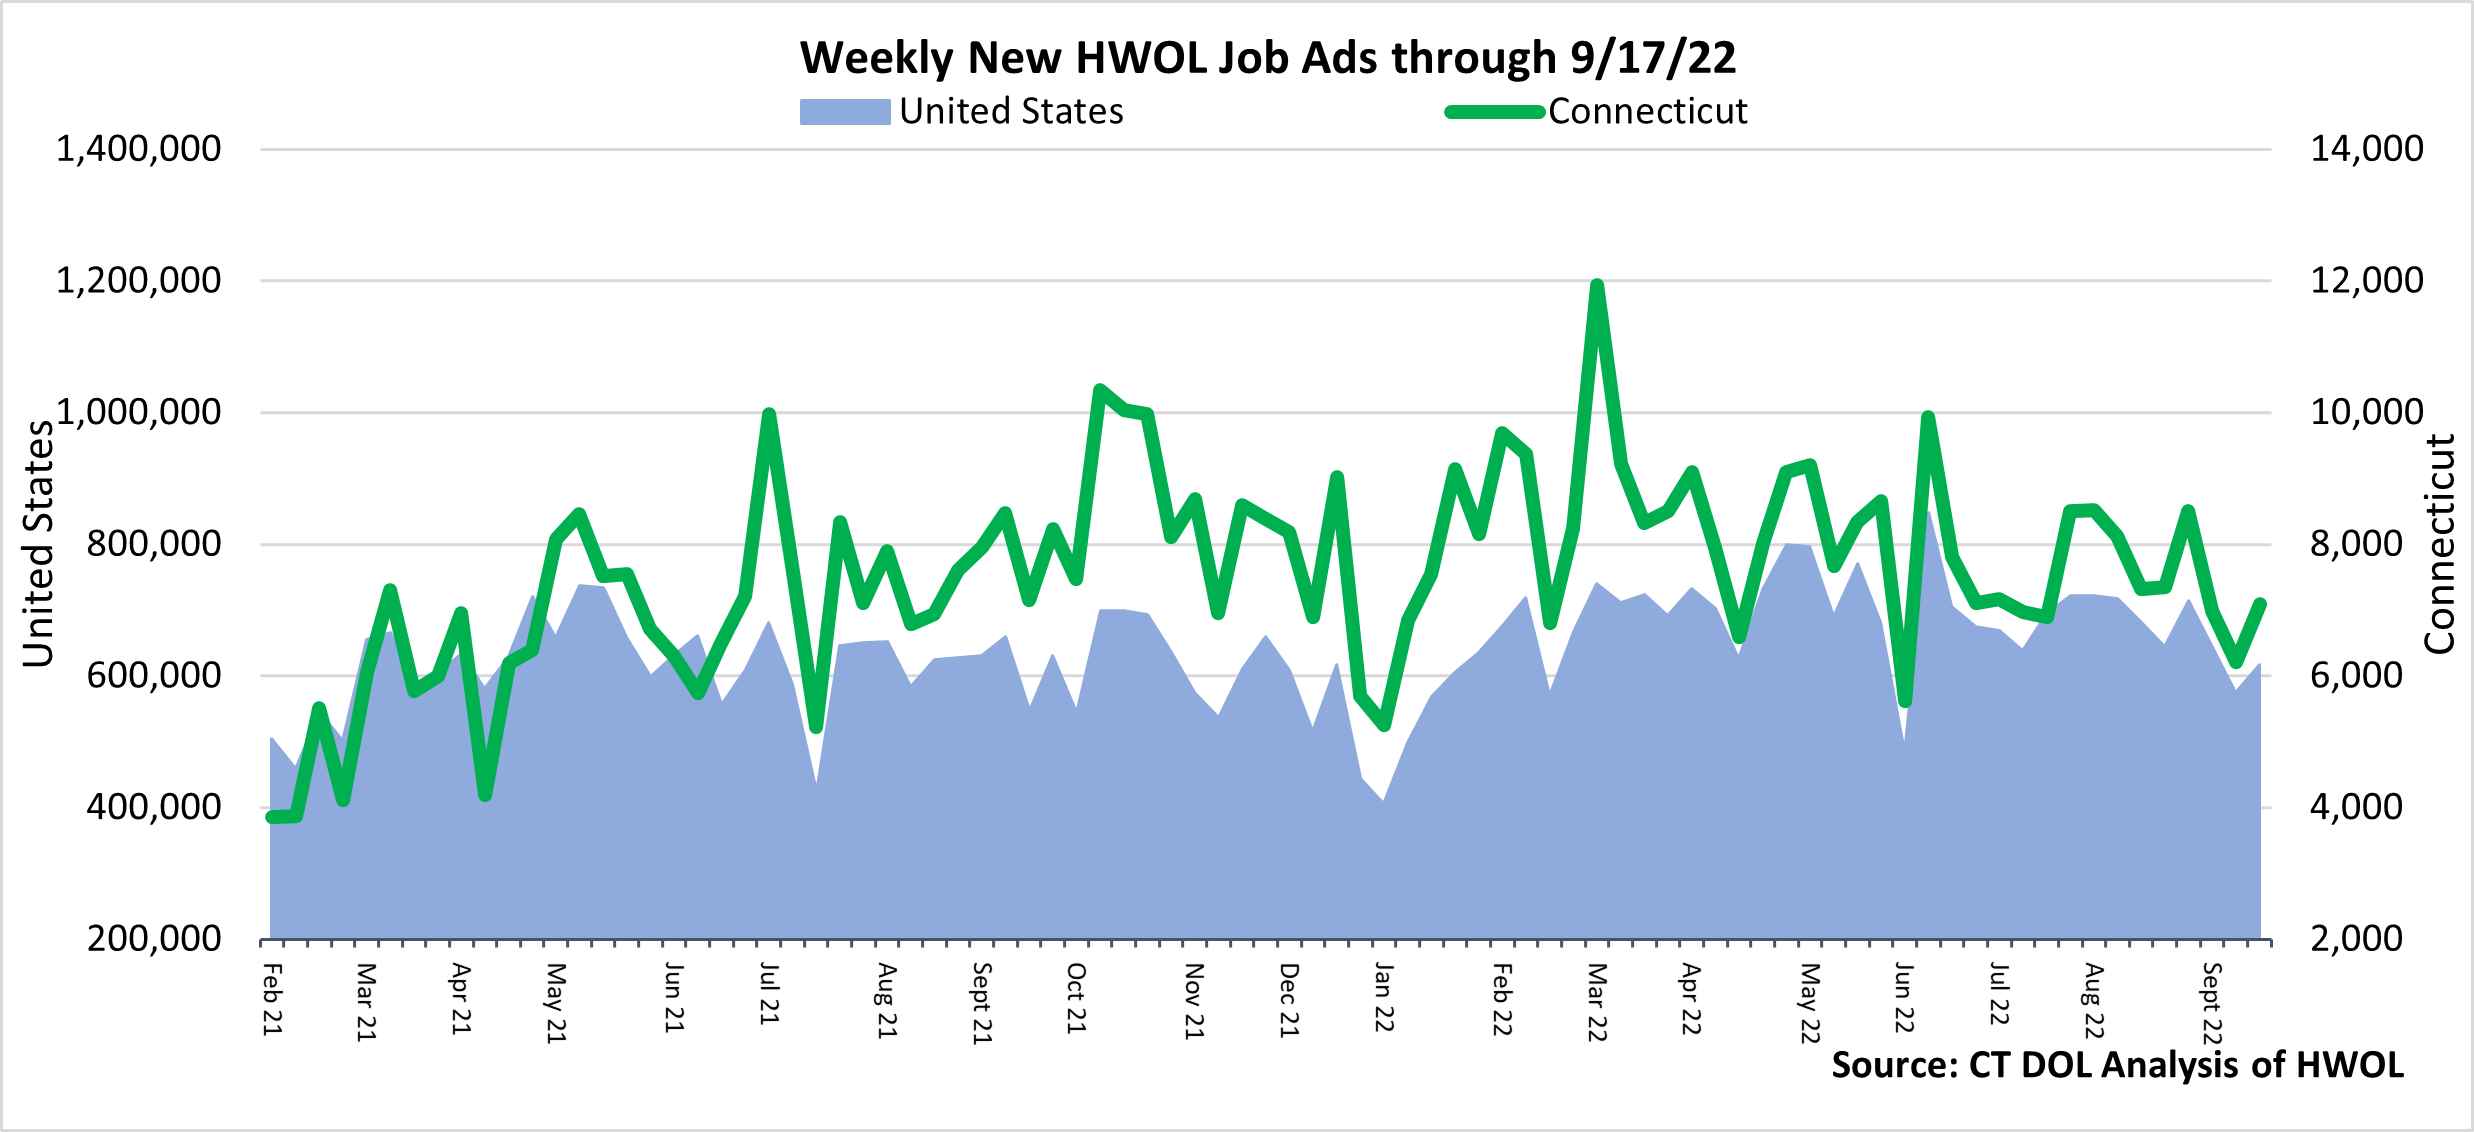 Connecticut Weekly Statewide New HWOL Job Ads through 09/17/22